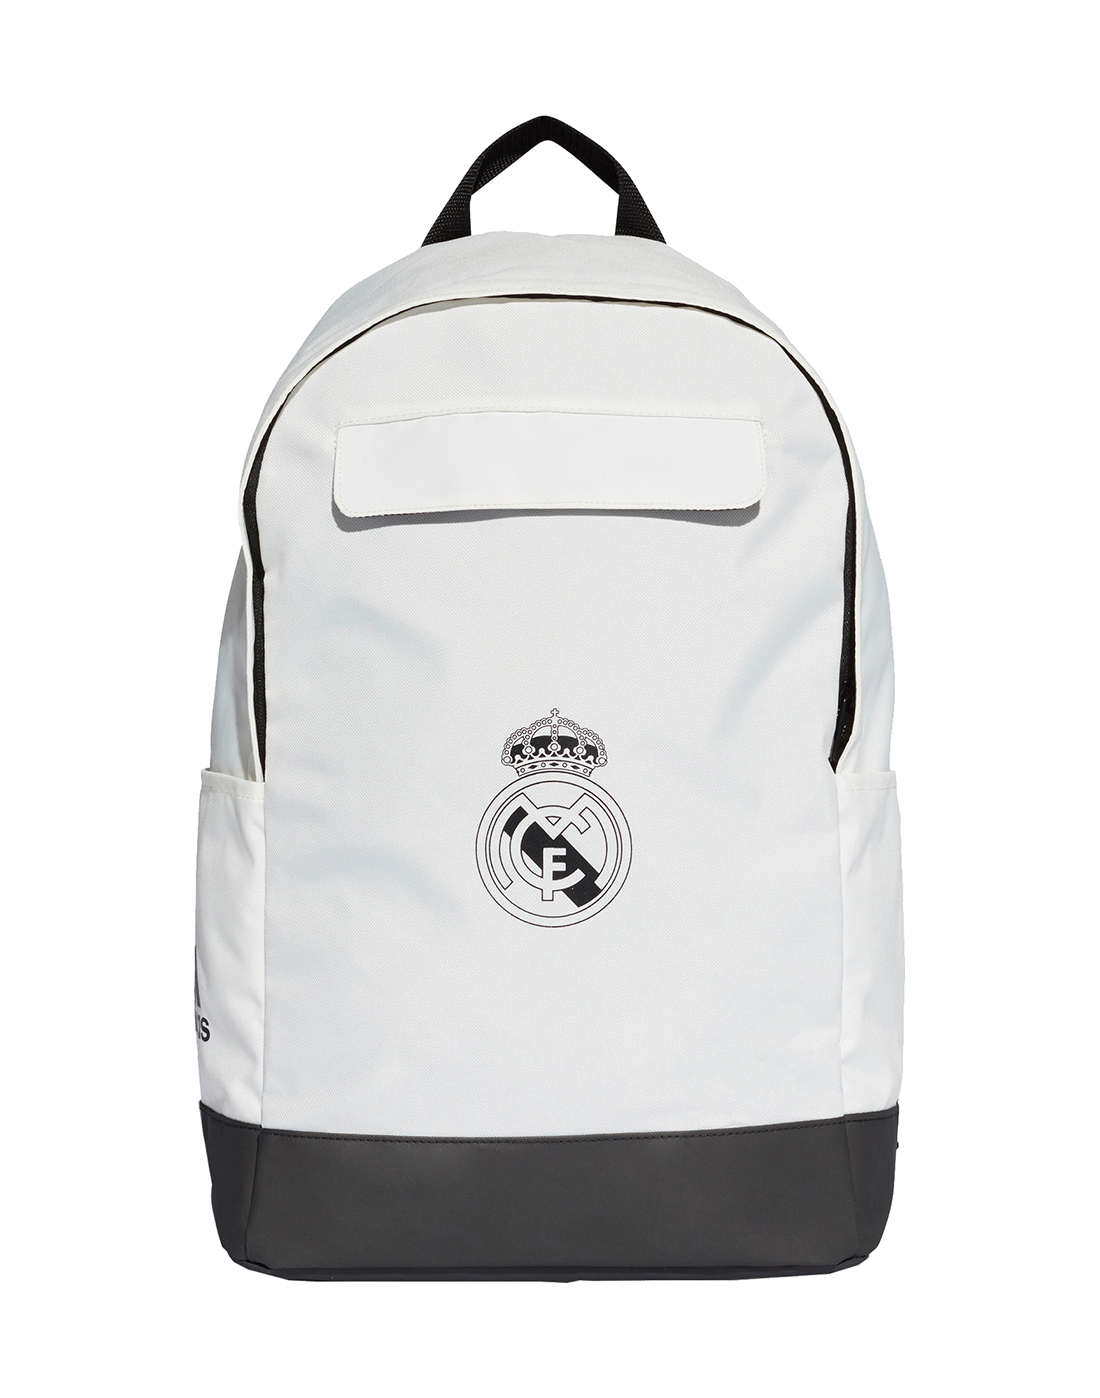 Real Madrid Backpack | Life Style Sports